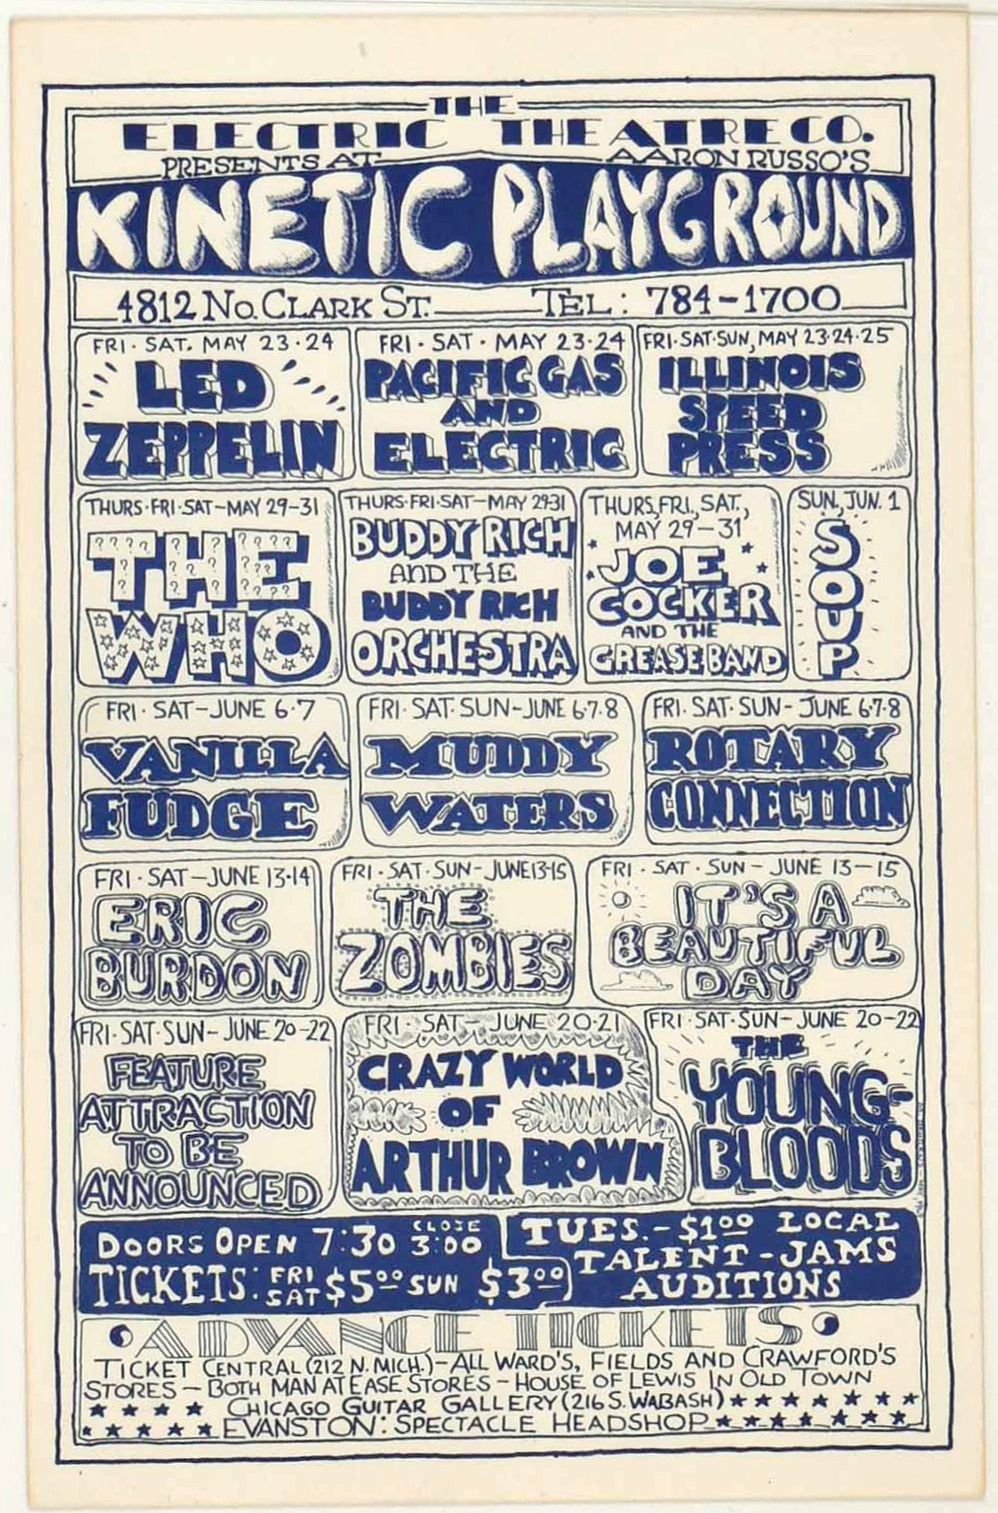 AOR-3.127 Led Zeppelin & The Who Kinetic Playground 1969 Show Calendar Concert Poster